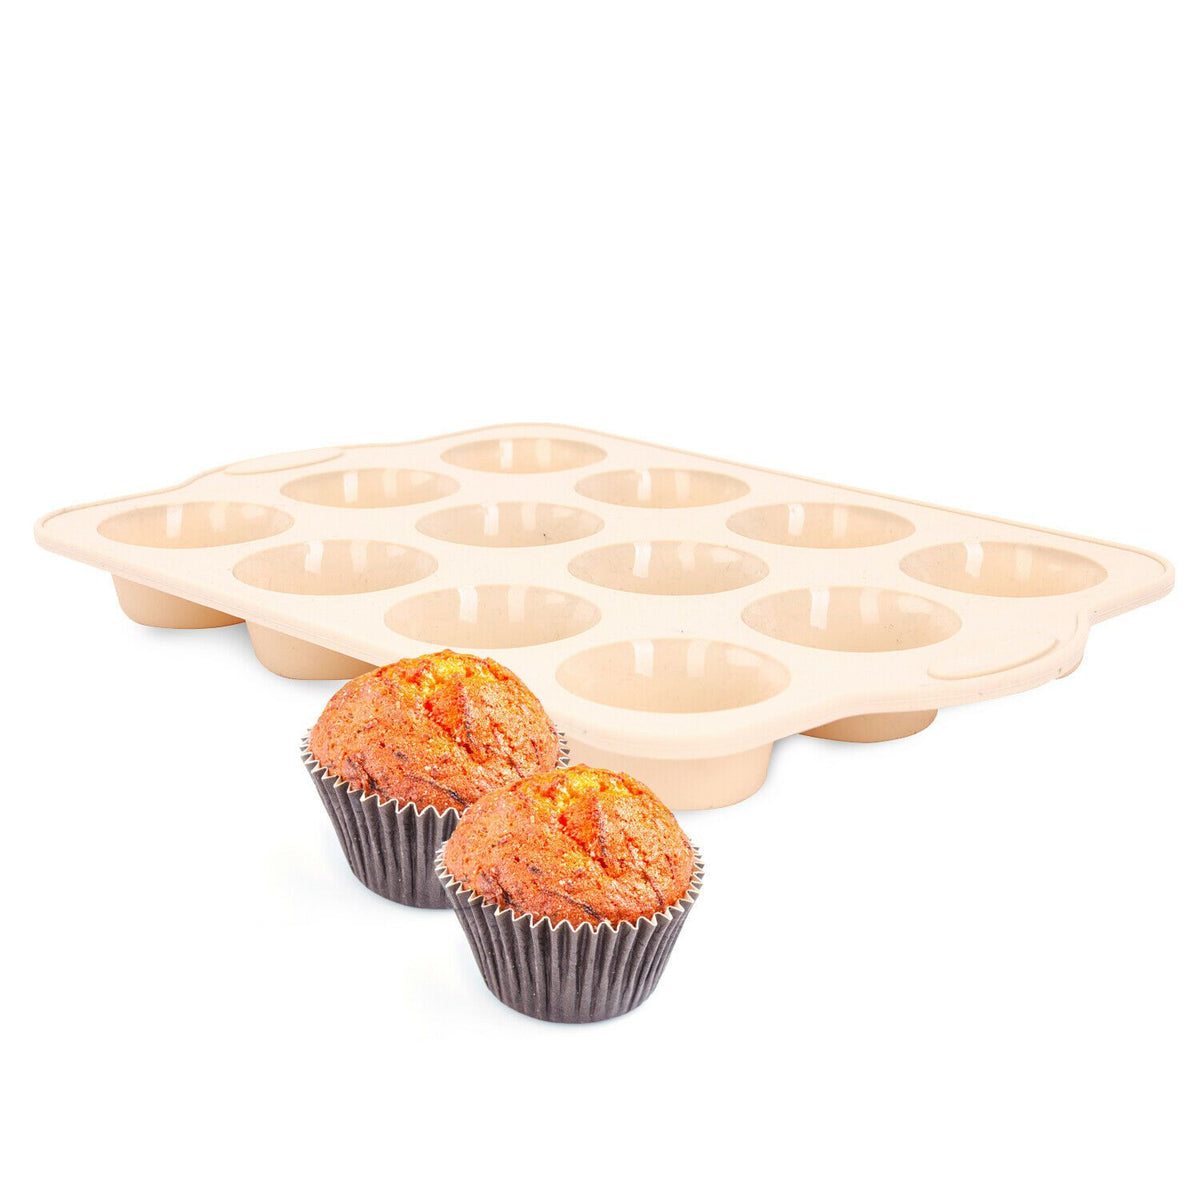 Royalford 12 Cup Silicone Baking Mould Royalford 